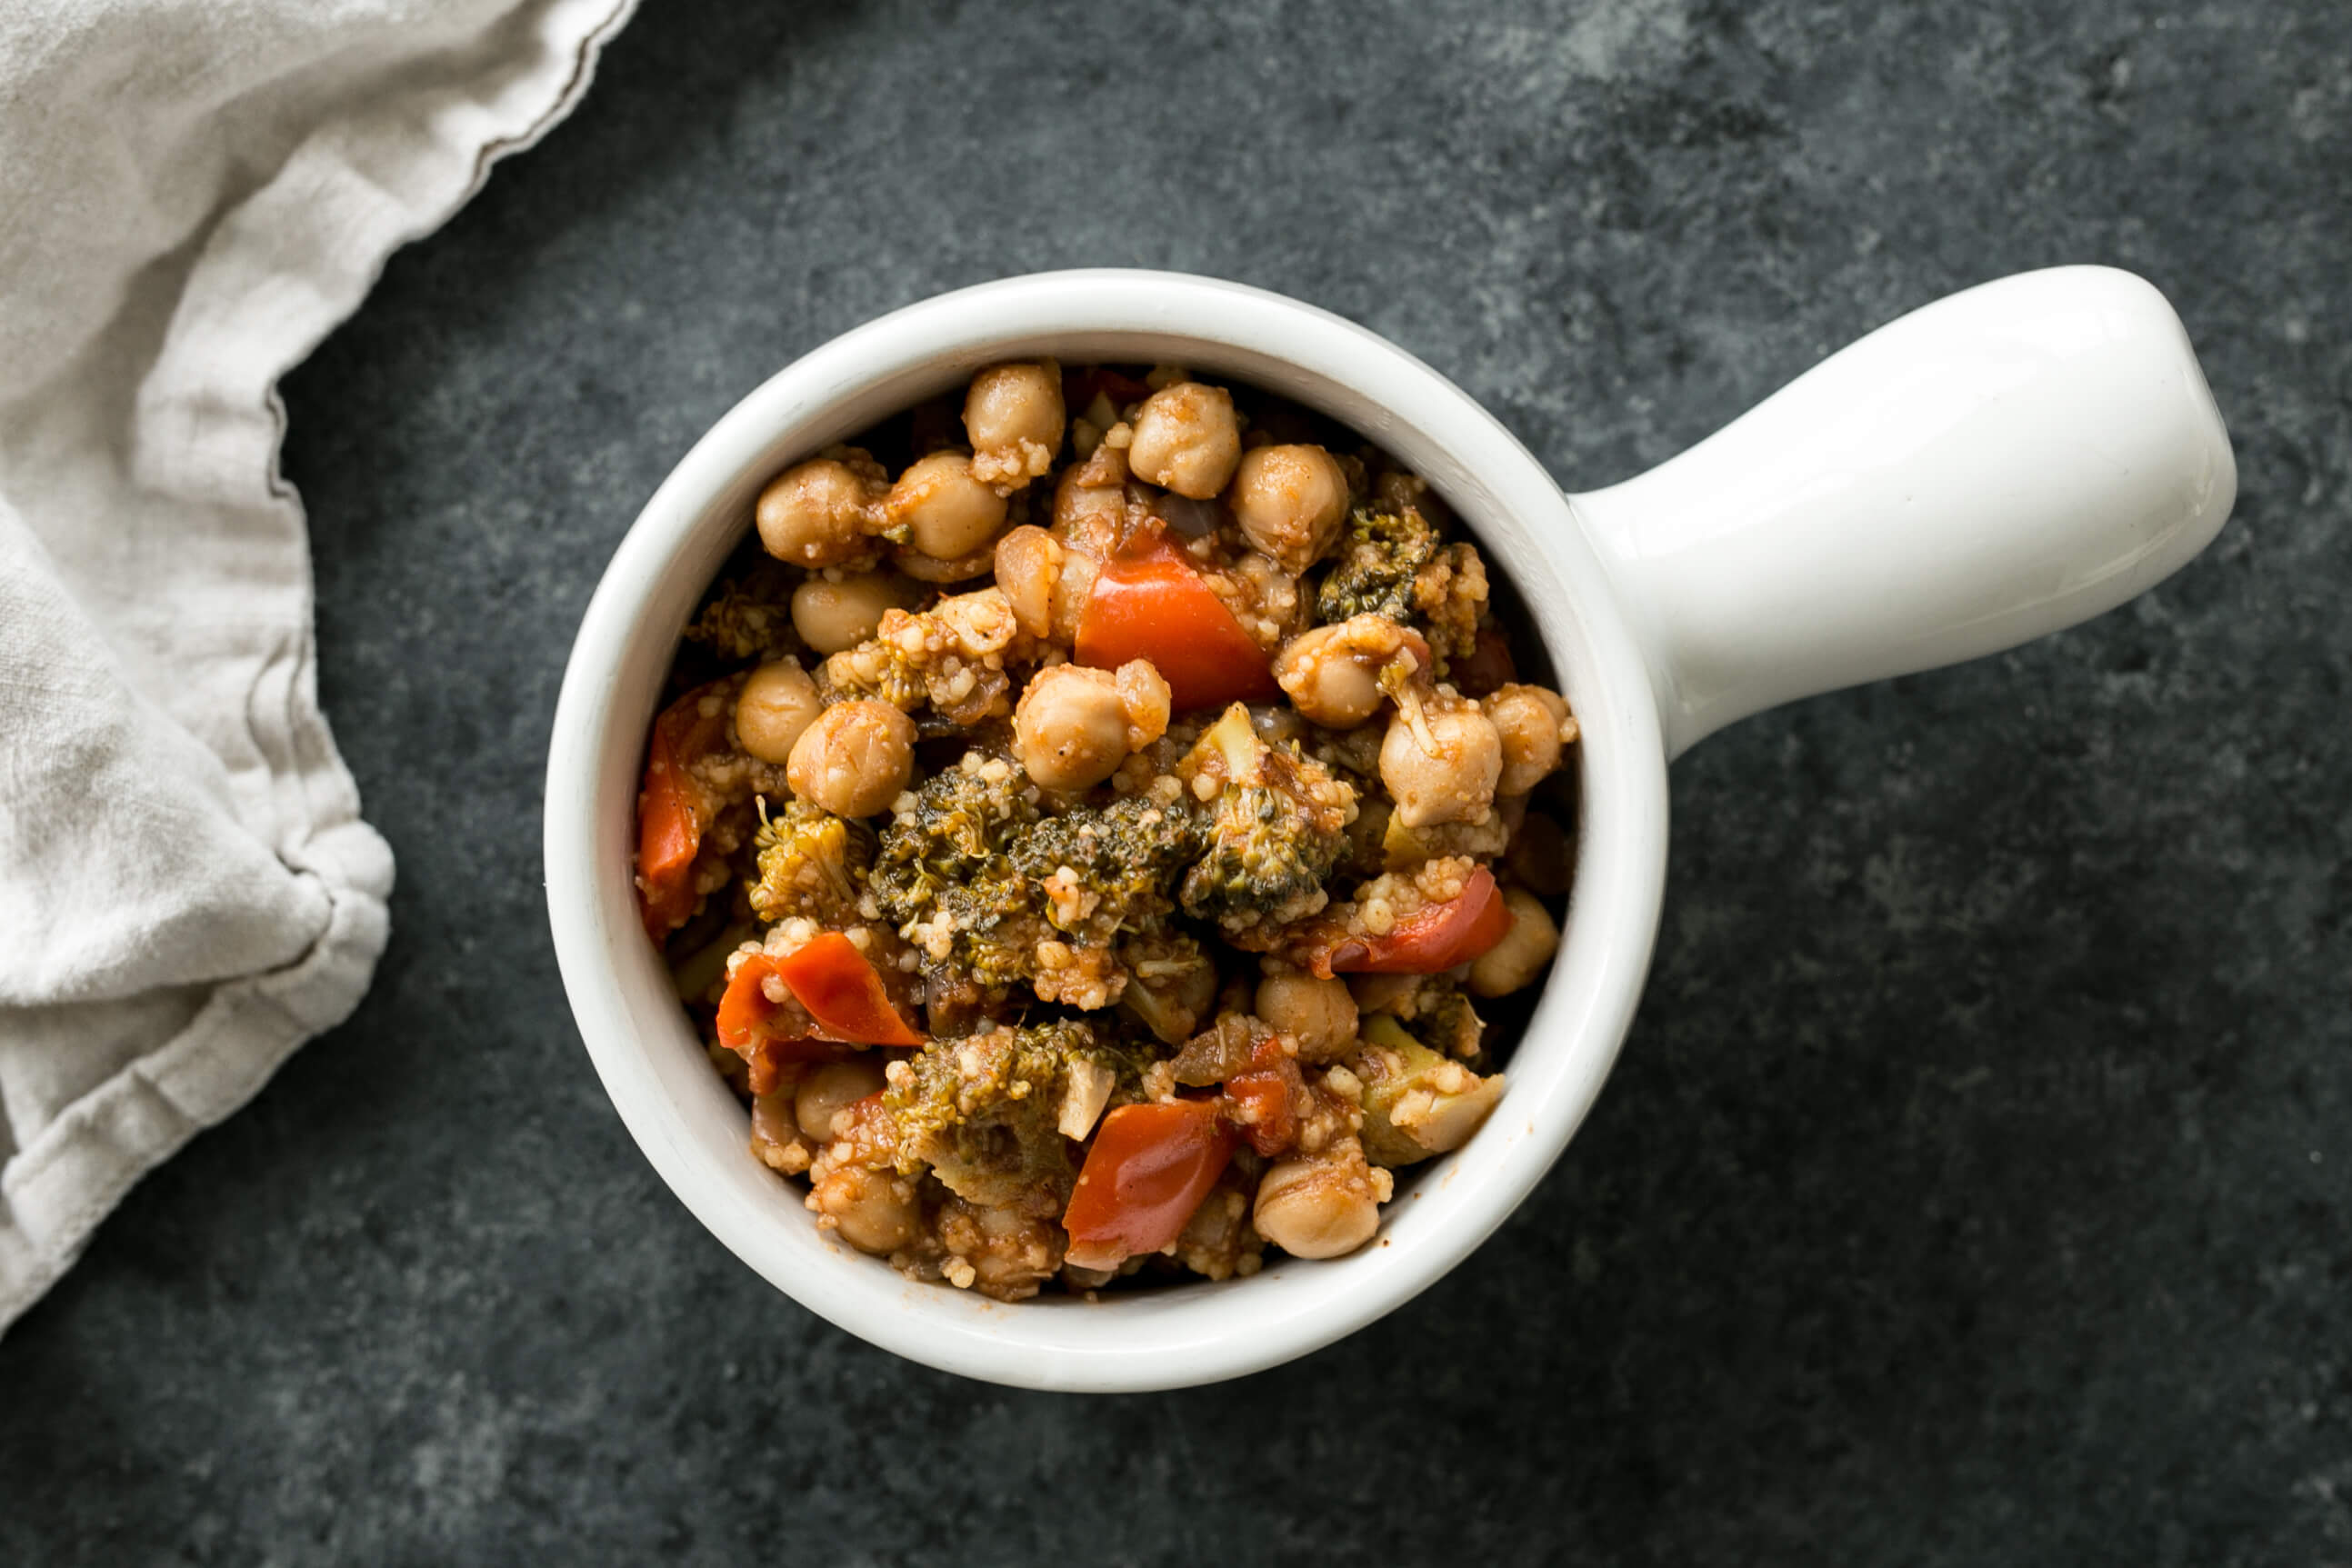 20 Meal Ideas to Help Clients Manage Arthritis: Chickpea Tikka Masala with Couscous